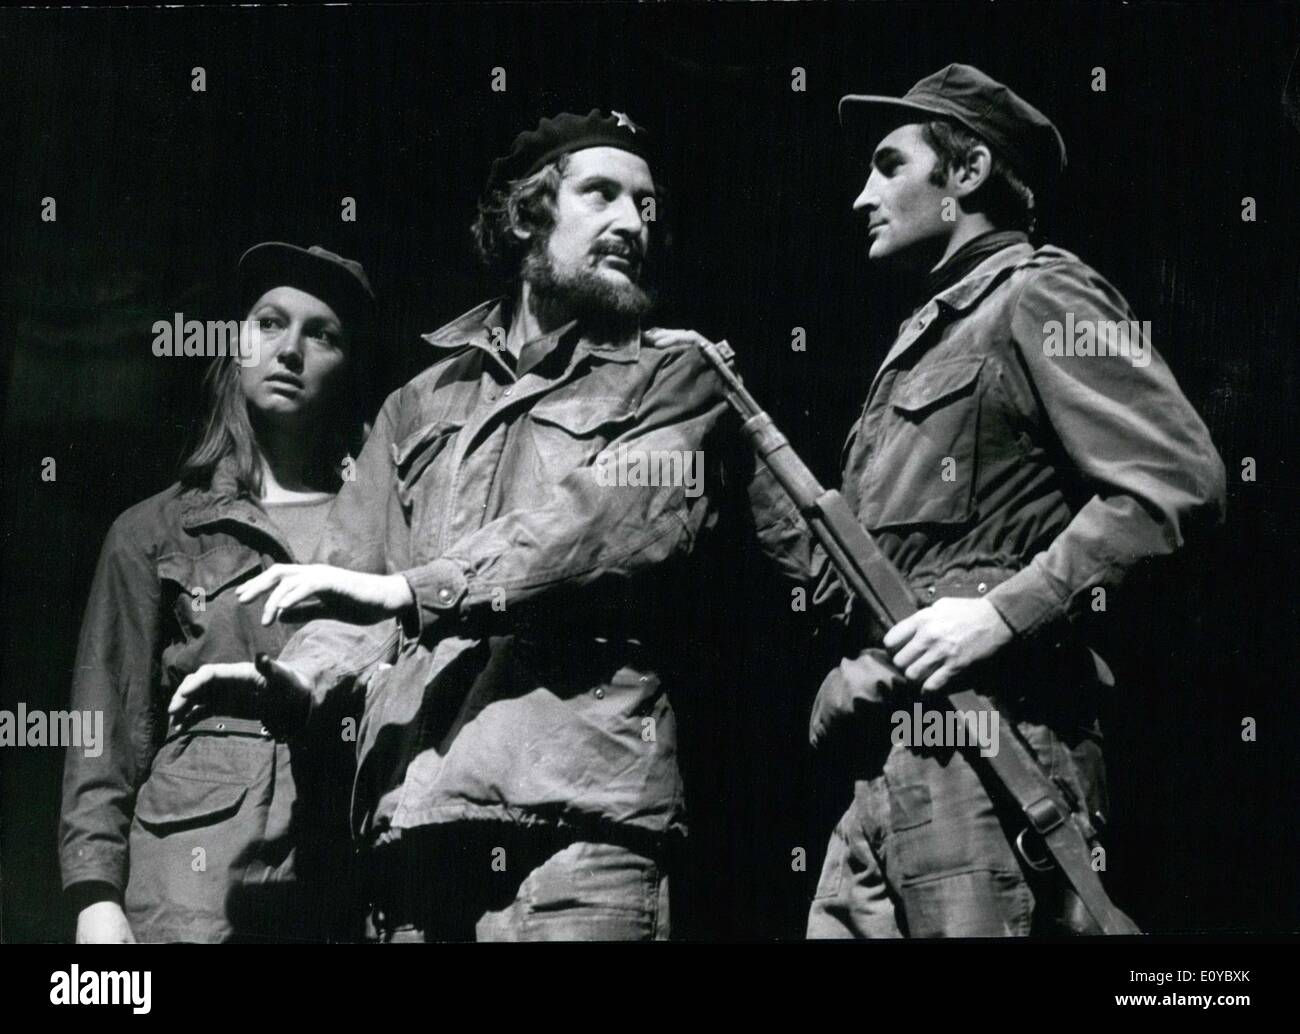 Oct. 16, 1969 - Joerg Wehmaier produced the John Spurling play ''Che Guevara,'' about the famous Cuban guerrilla leader. The piece premiered in Stuttgart's Staatstheater. Pictured here are actors in a scene from the play. From left to right are: M. Dickow, B. Huebner(as Che) and Wolfgang Decker. Stock Photo